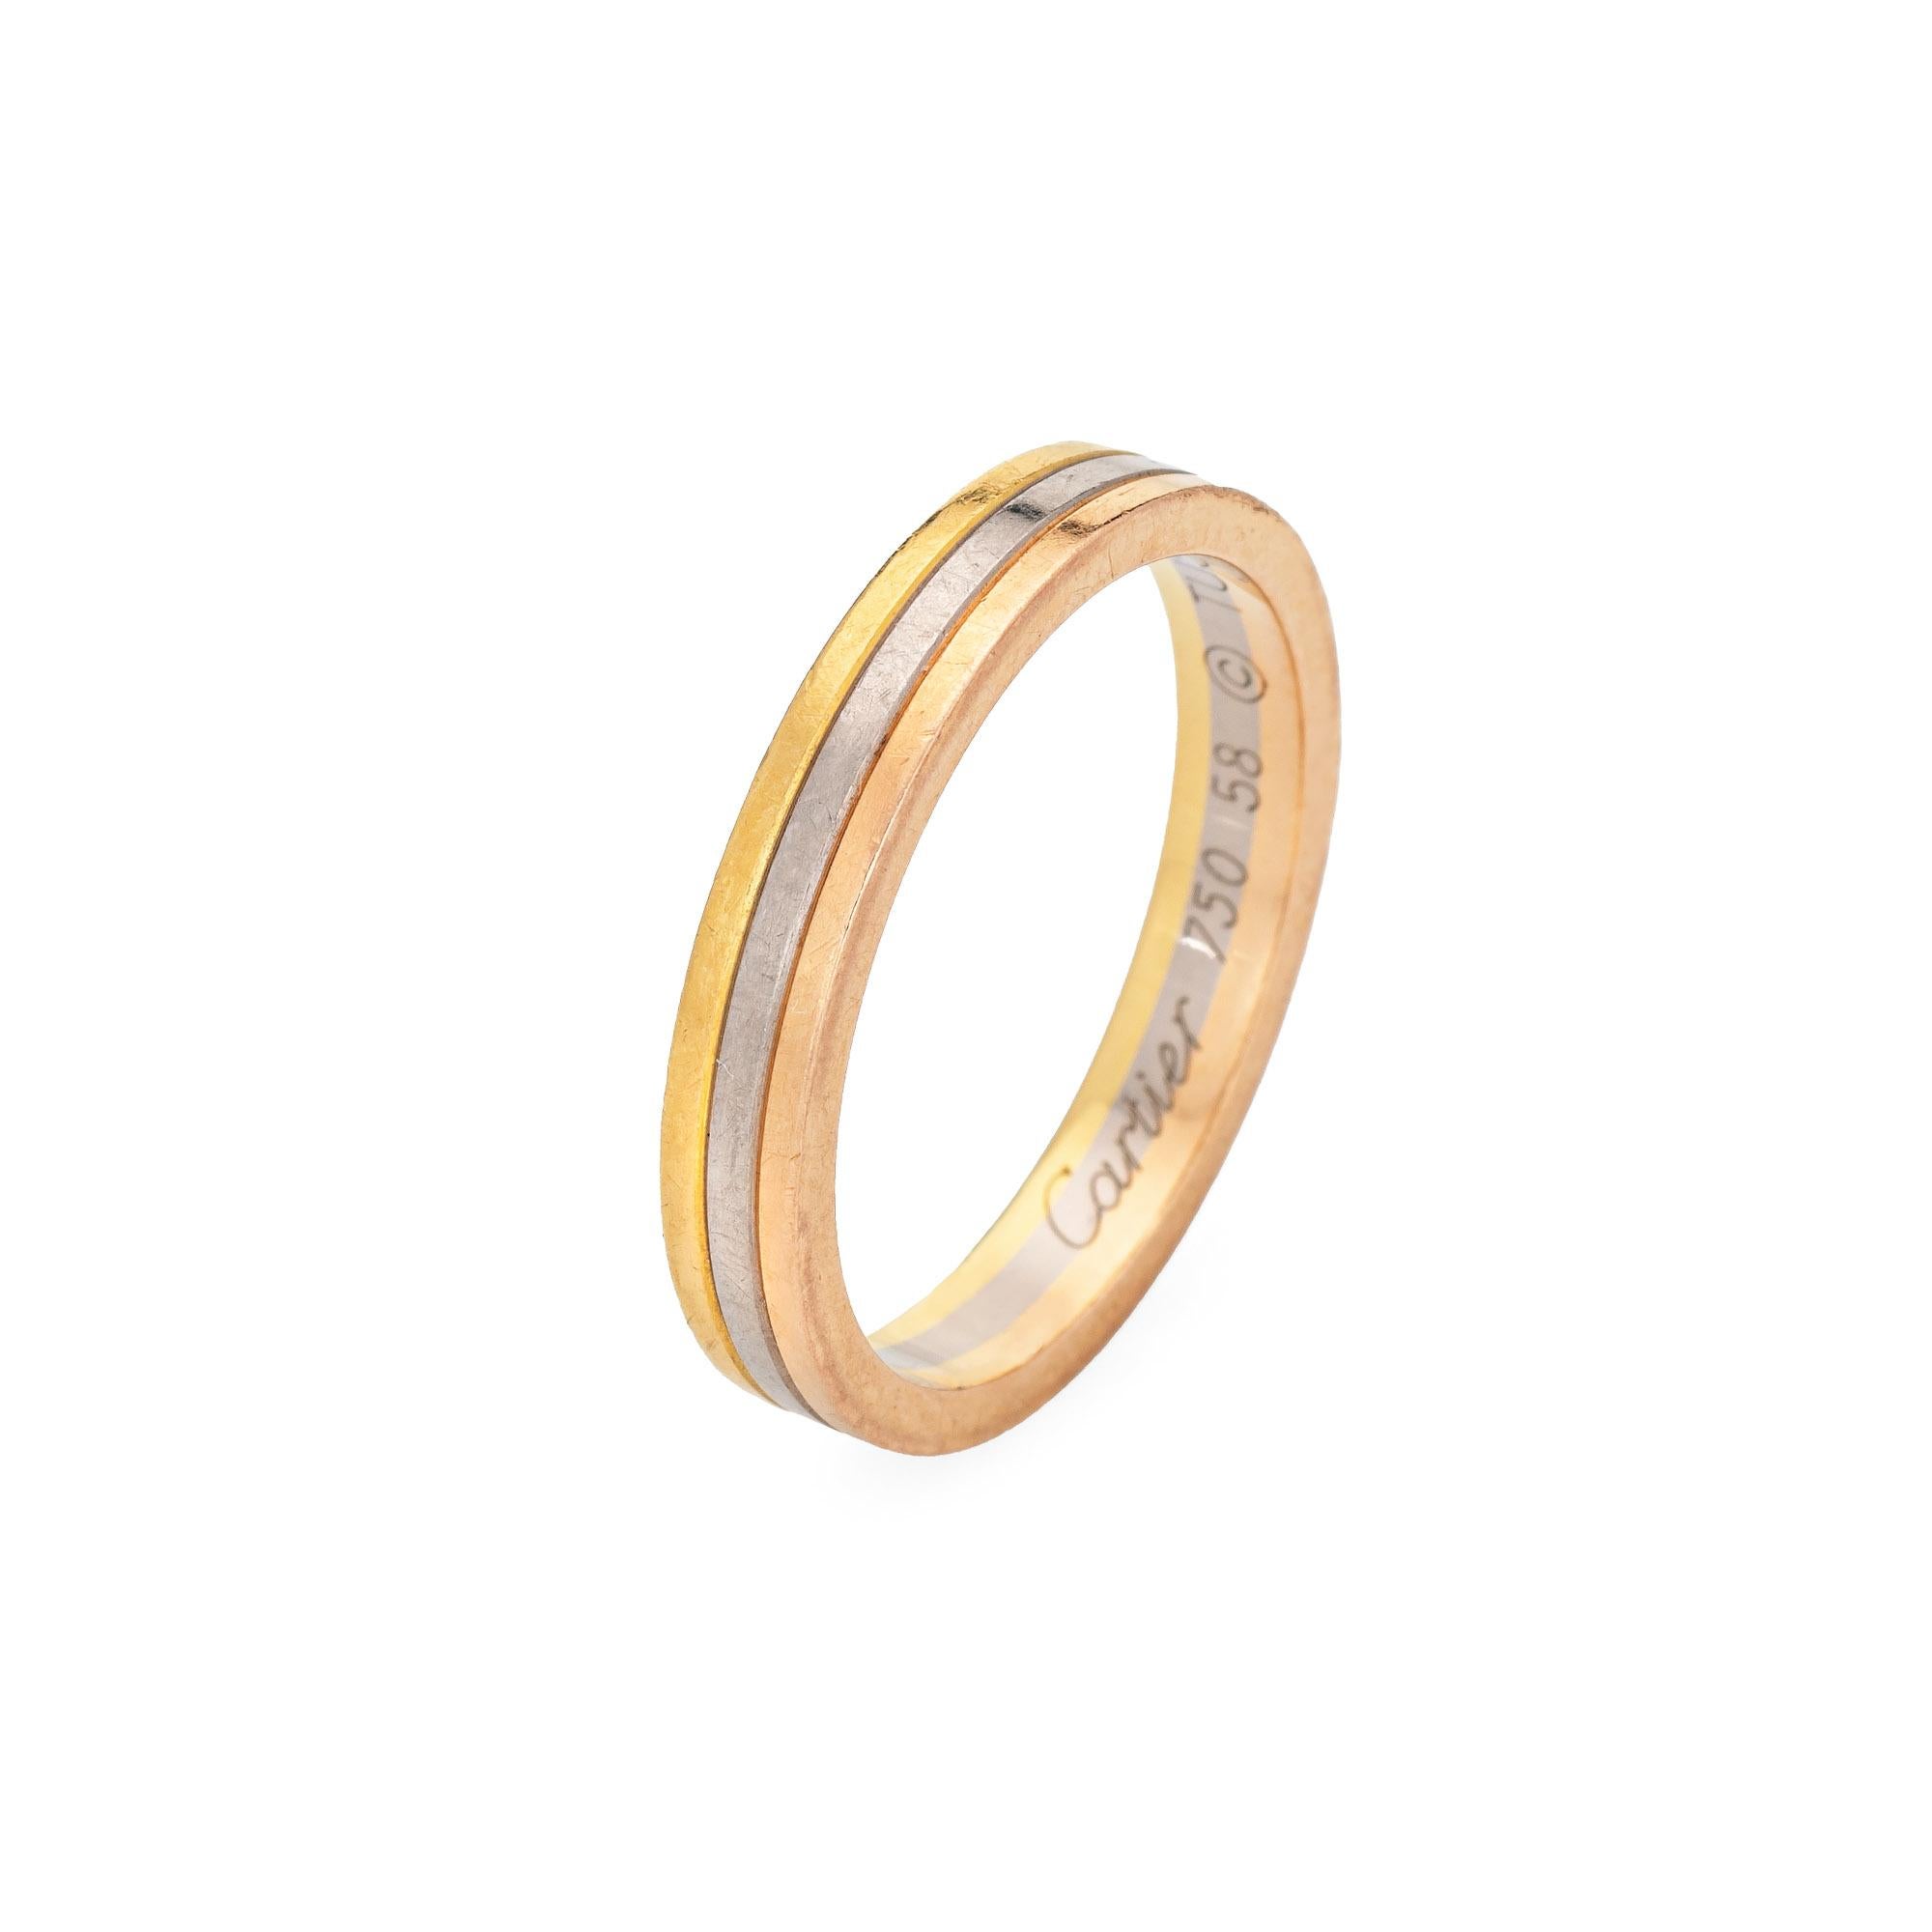 Pre-owned Vendome Louis Cartier wedding band crafted in 18k yellow, white & rose gold.  

The Cartier ring features bands of 18k rose, yellow & white gold. The 3.5mm wide ring is great worn alone or layered with your fine jewelry from any era. The